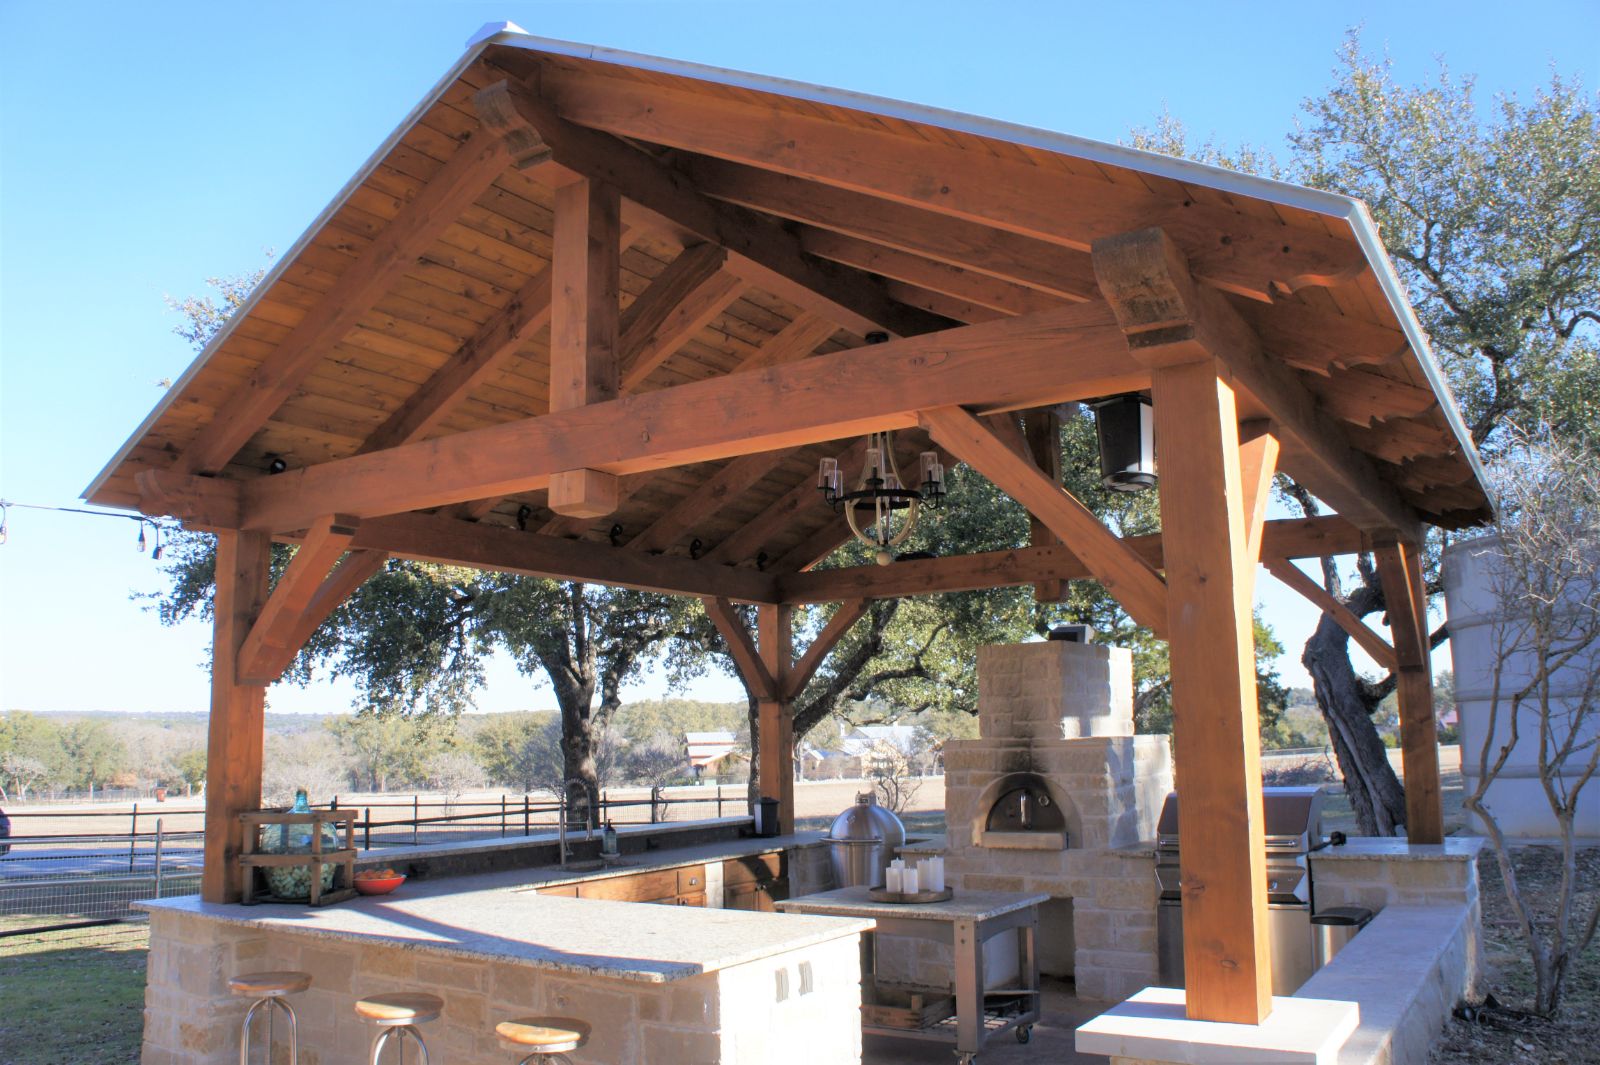 19x19, king post, patio furniture, barbecue or grill, kitchen or outdoor kitchen, firepit or fireplace, residential, garden structure, cabana, outdoor living, entertaining, free standing pavilion, post and beam, builder/contractor, austin